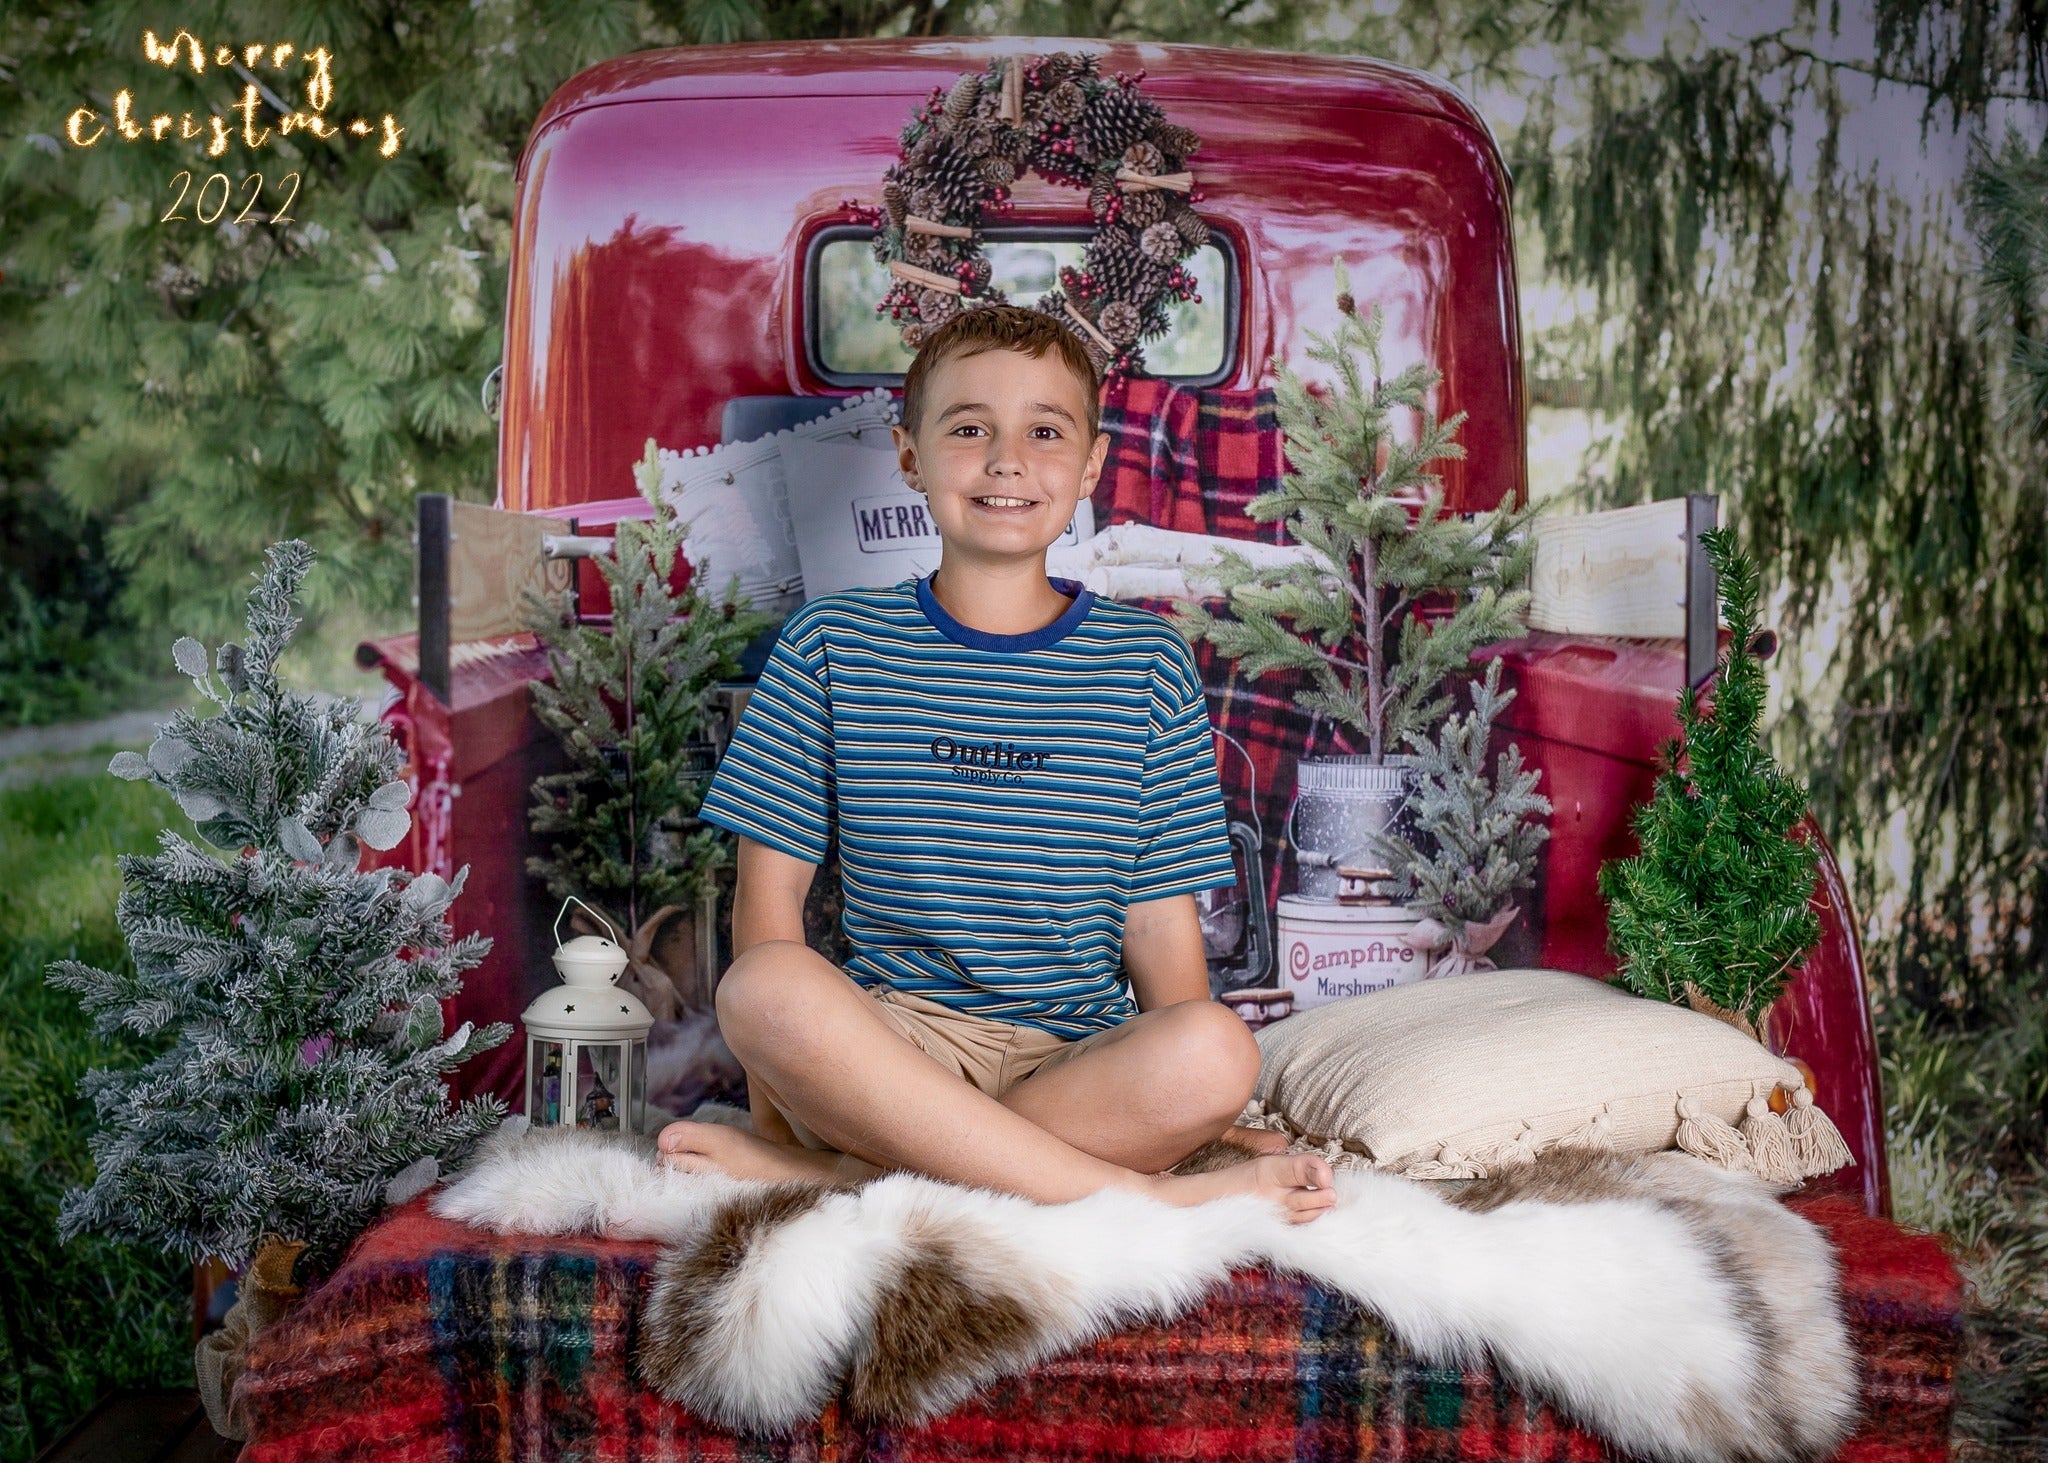 Kate Red Christmas Truck Backdrop Designed by Mandy Ringe Photography (Clearance US only)